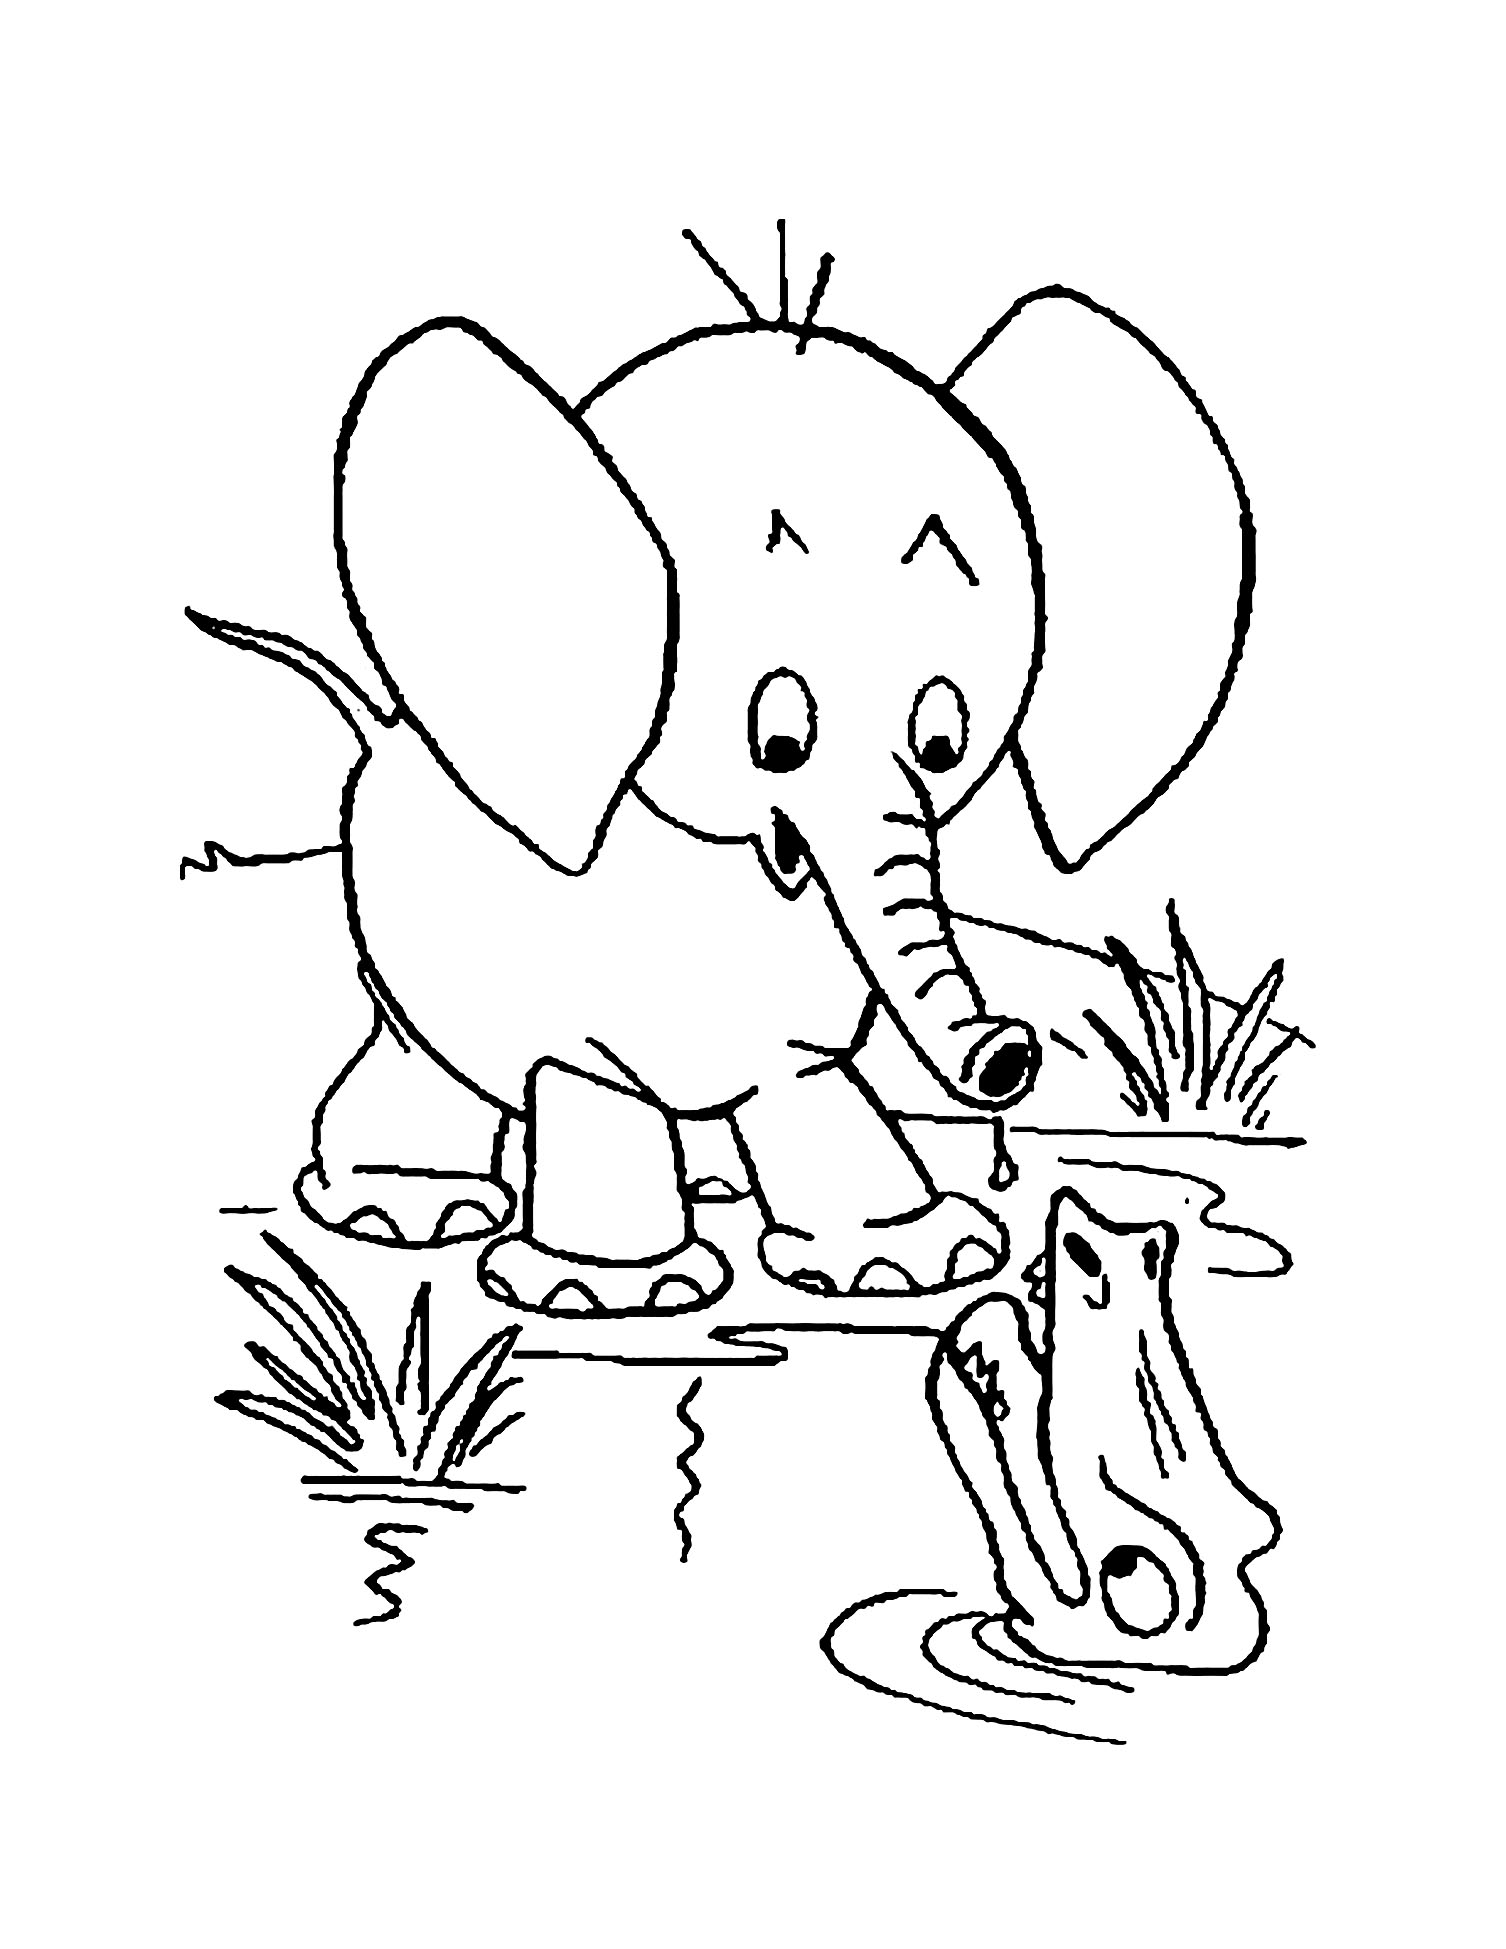 Easy elephant coloring for kids